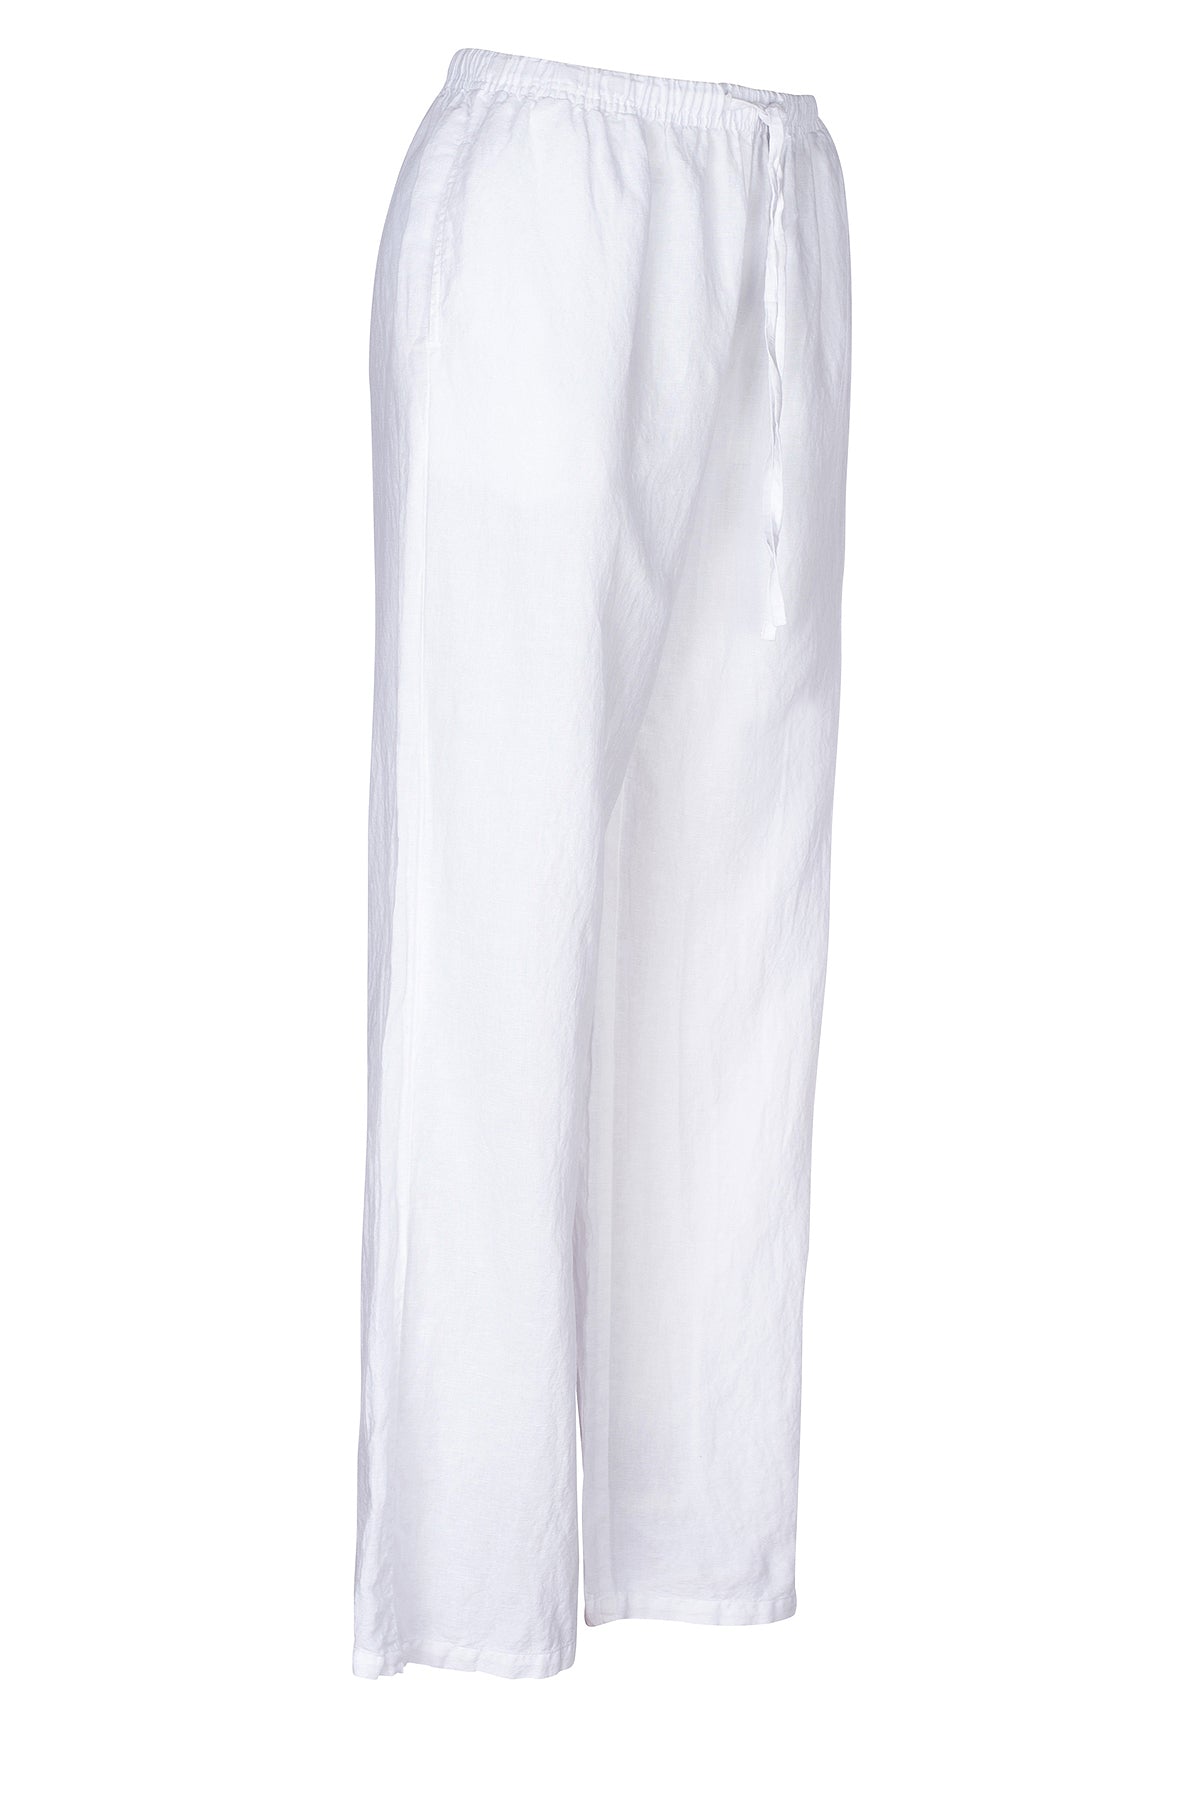 LUXZUZ // ONE TWO Elilin Pant Pant 901 White